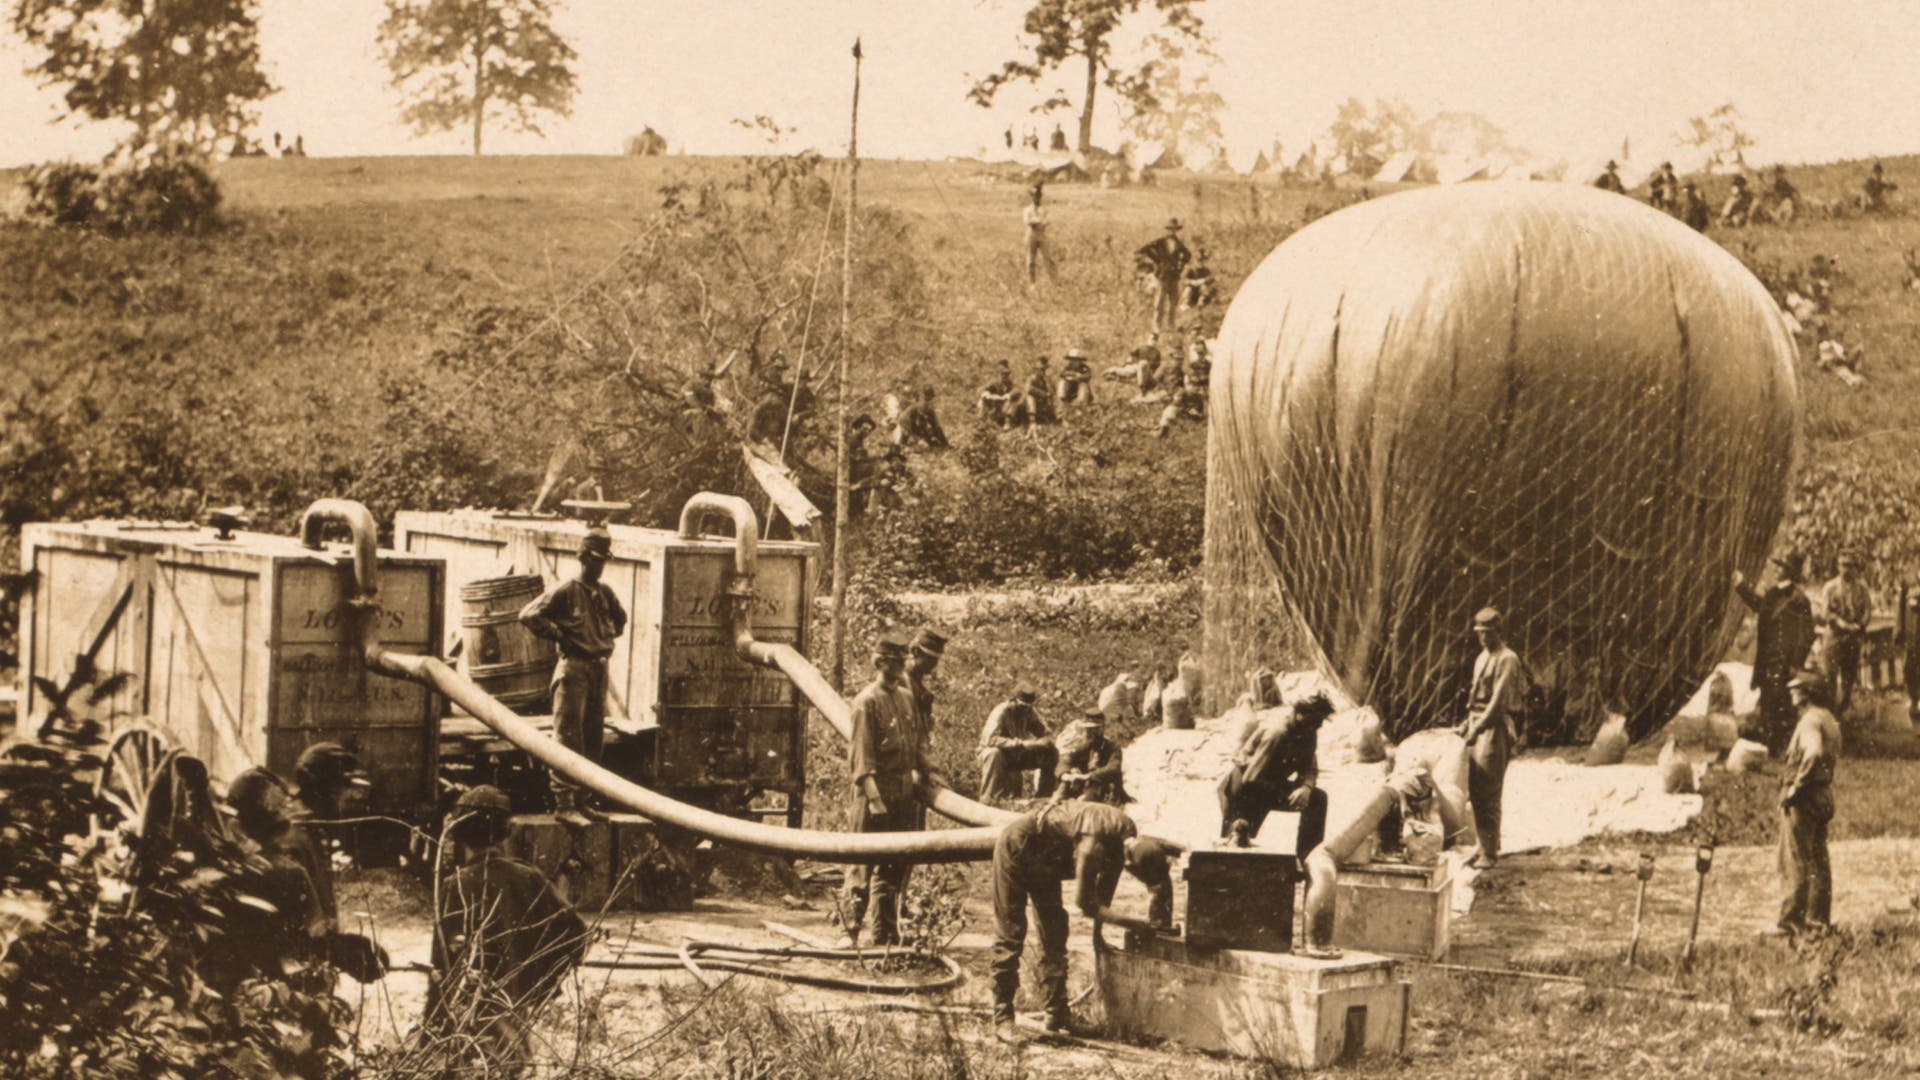 A military balloon deployed in the Civil War near Gaines Mill, Virginia (Photo by Buyenlarge/Getty Images)